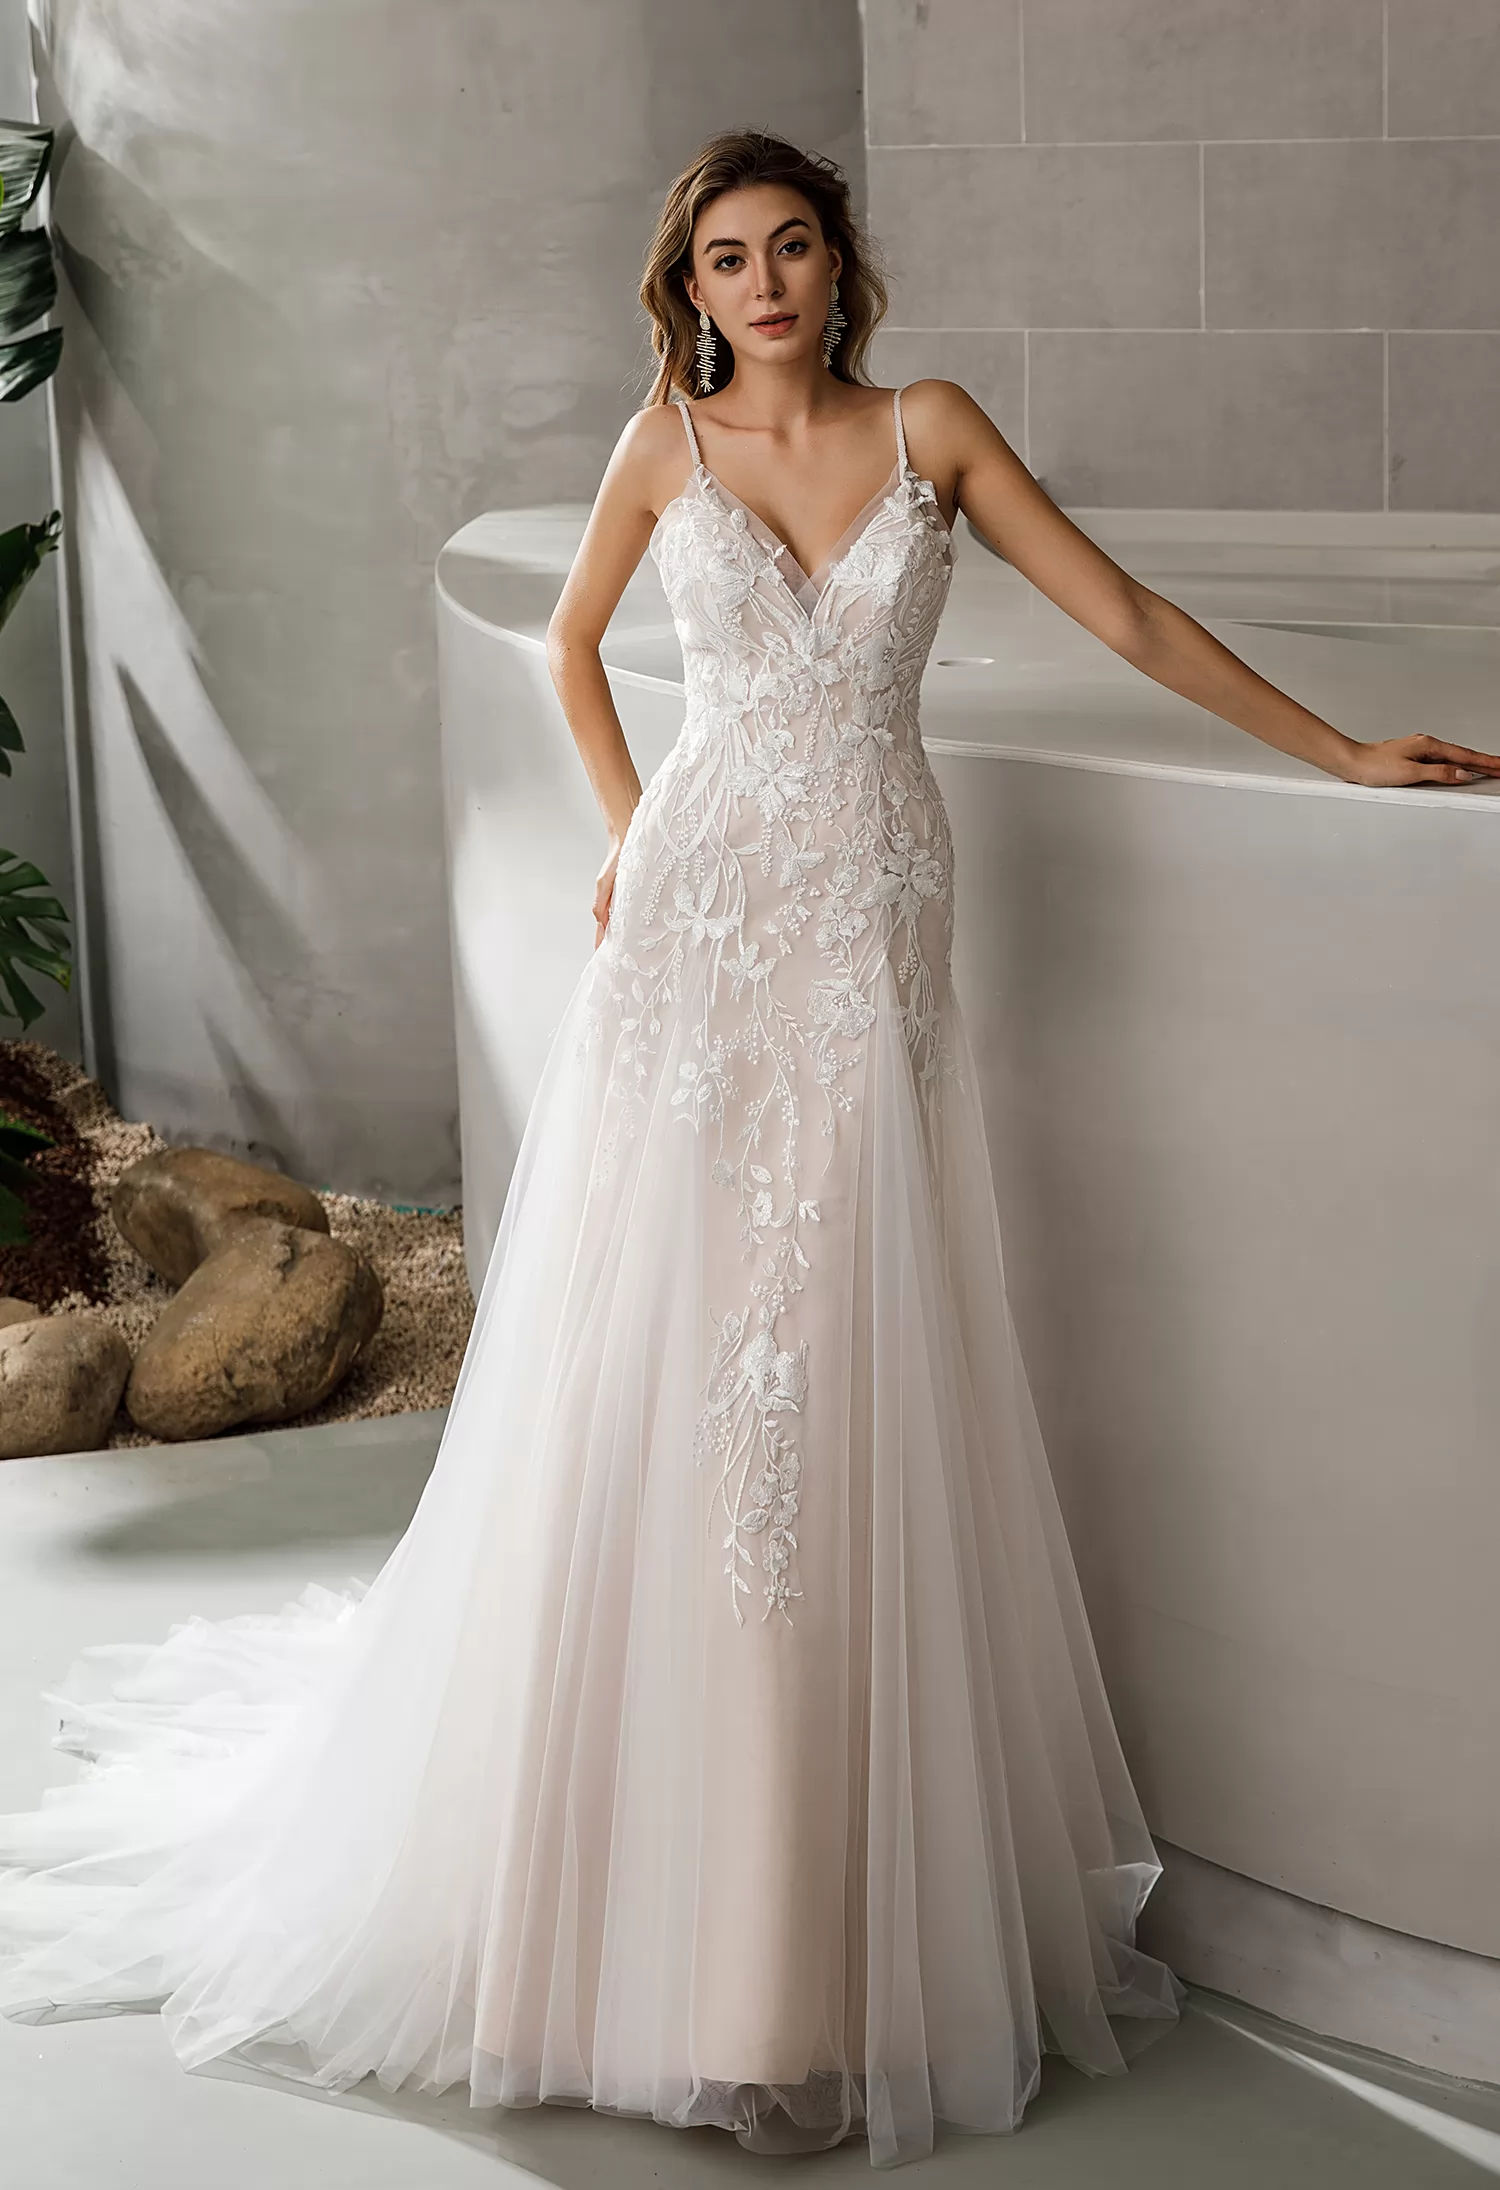 Inspired Lace Flattering Silhouette Wedding Dress